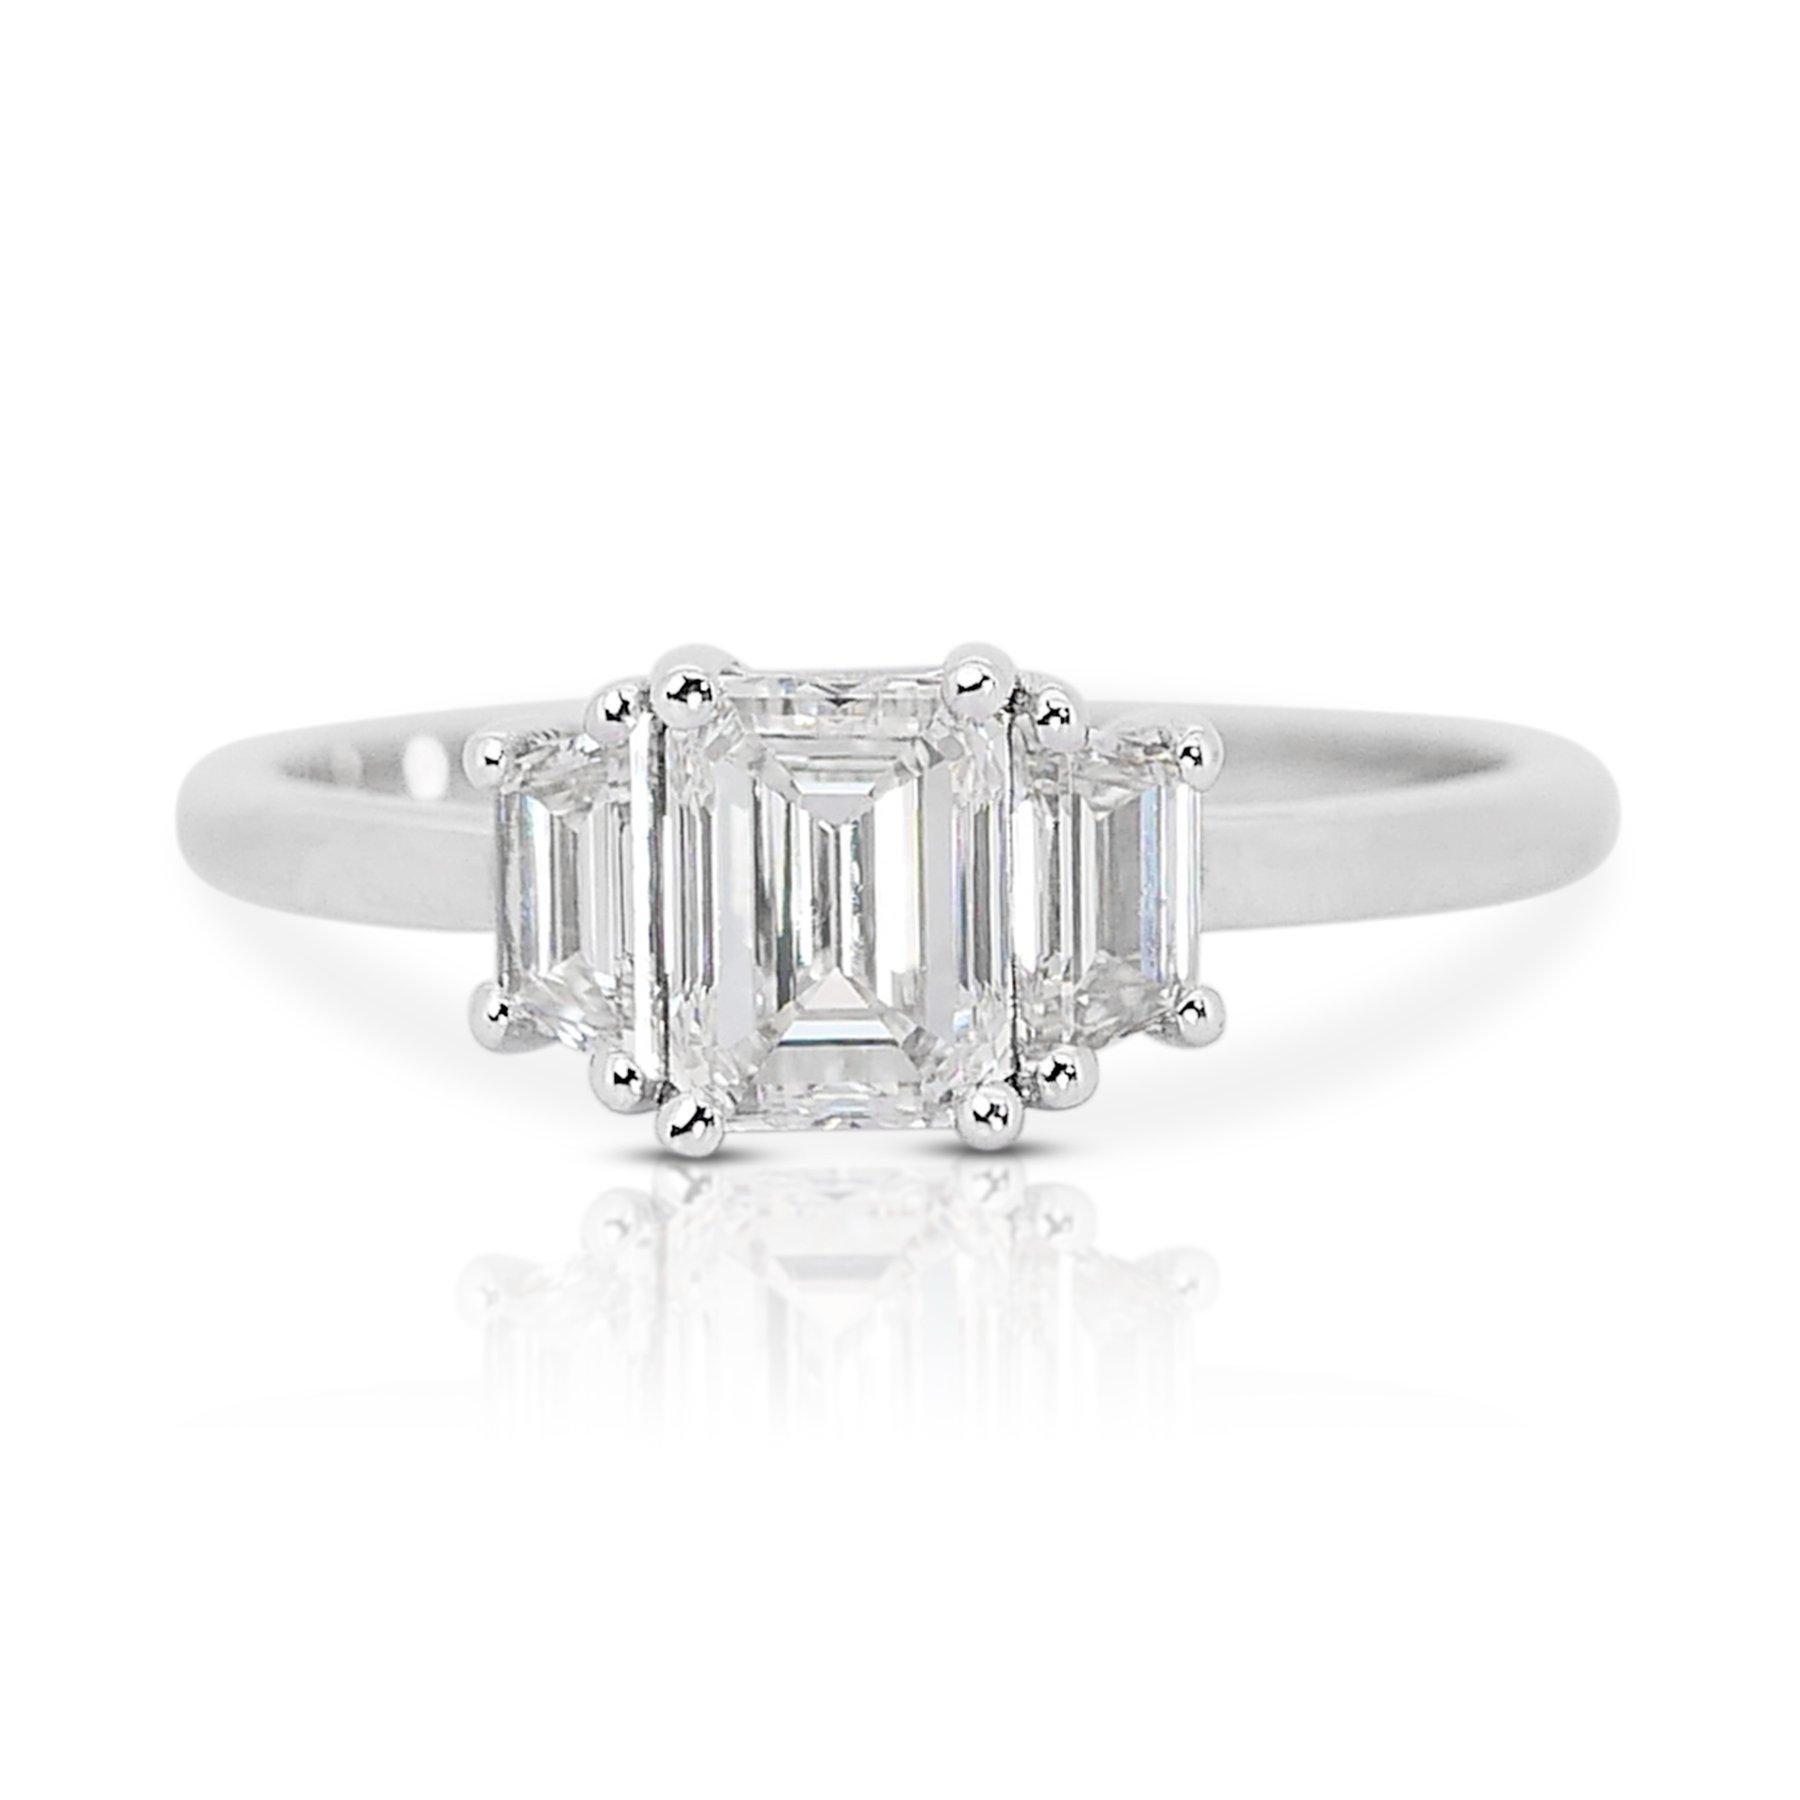 Magnificent 1.35ct Diamond 3-Stone Ring in 18k White Gold - GIA Certified For Sale 3